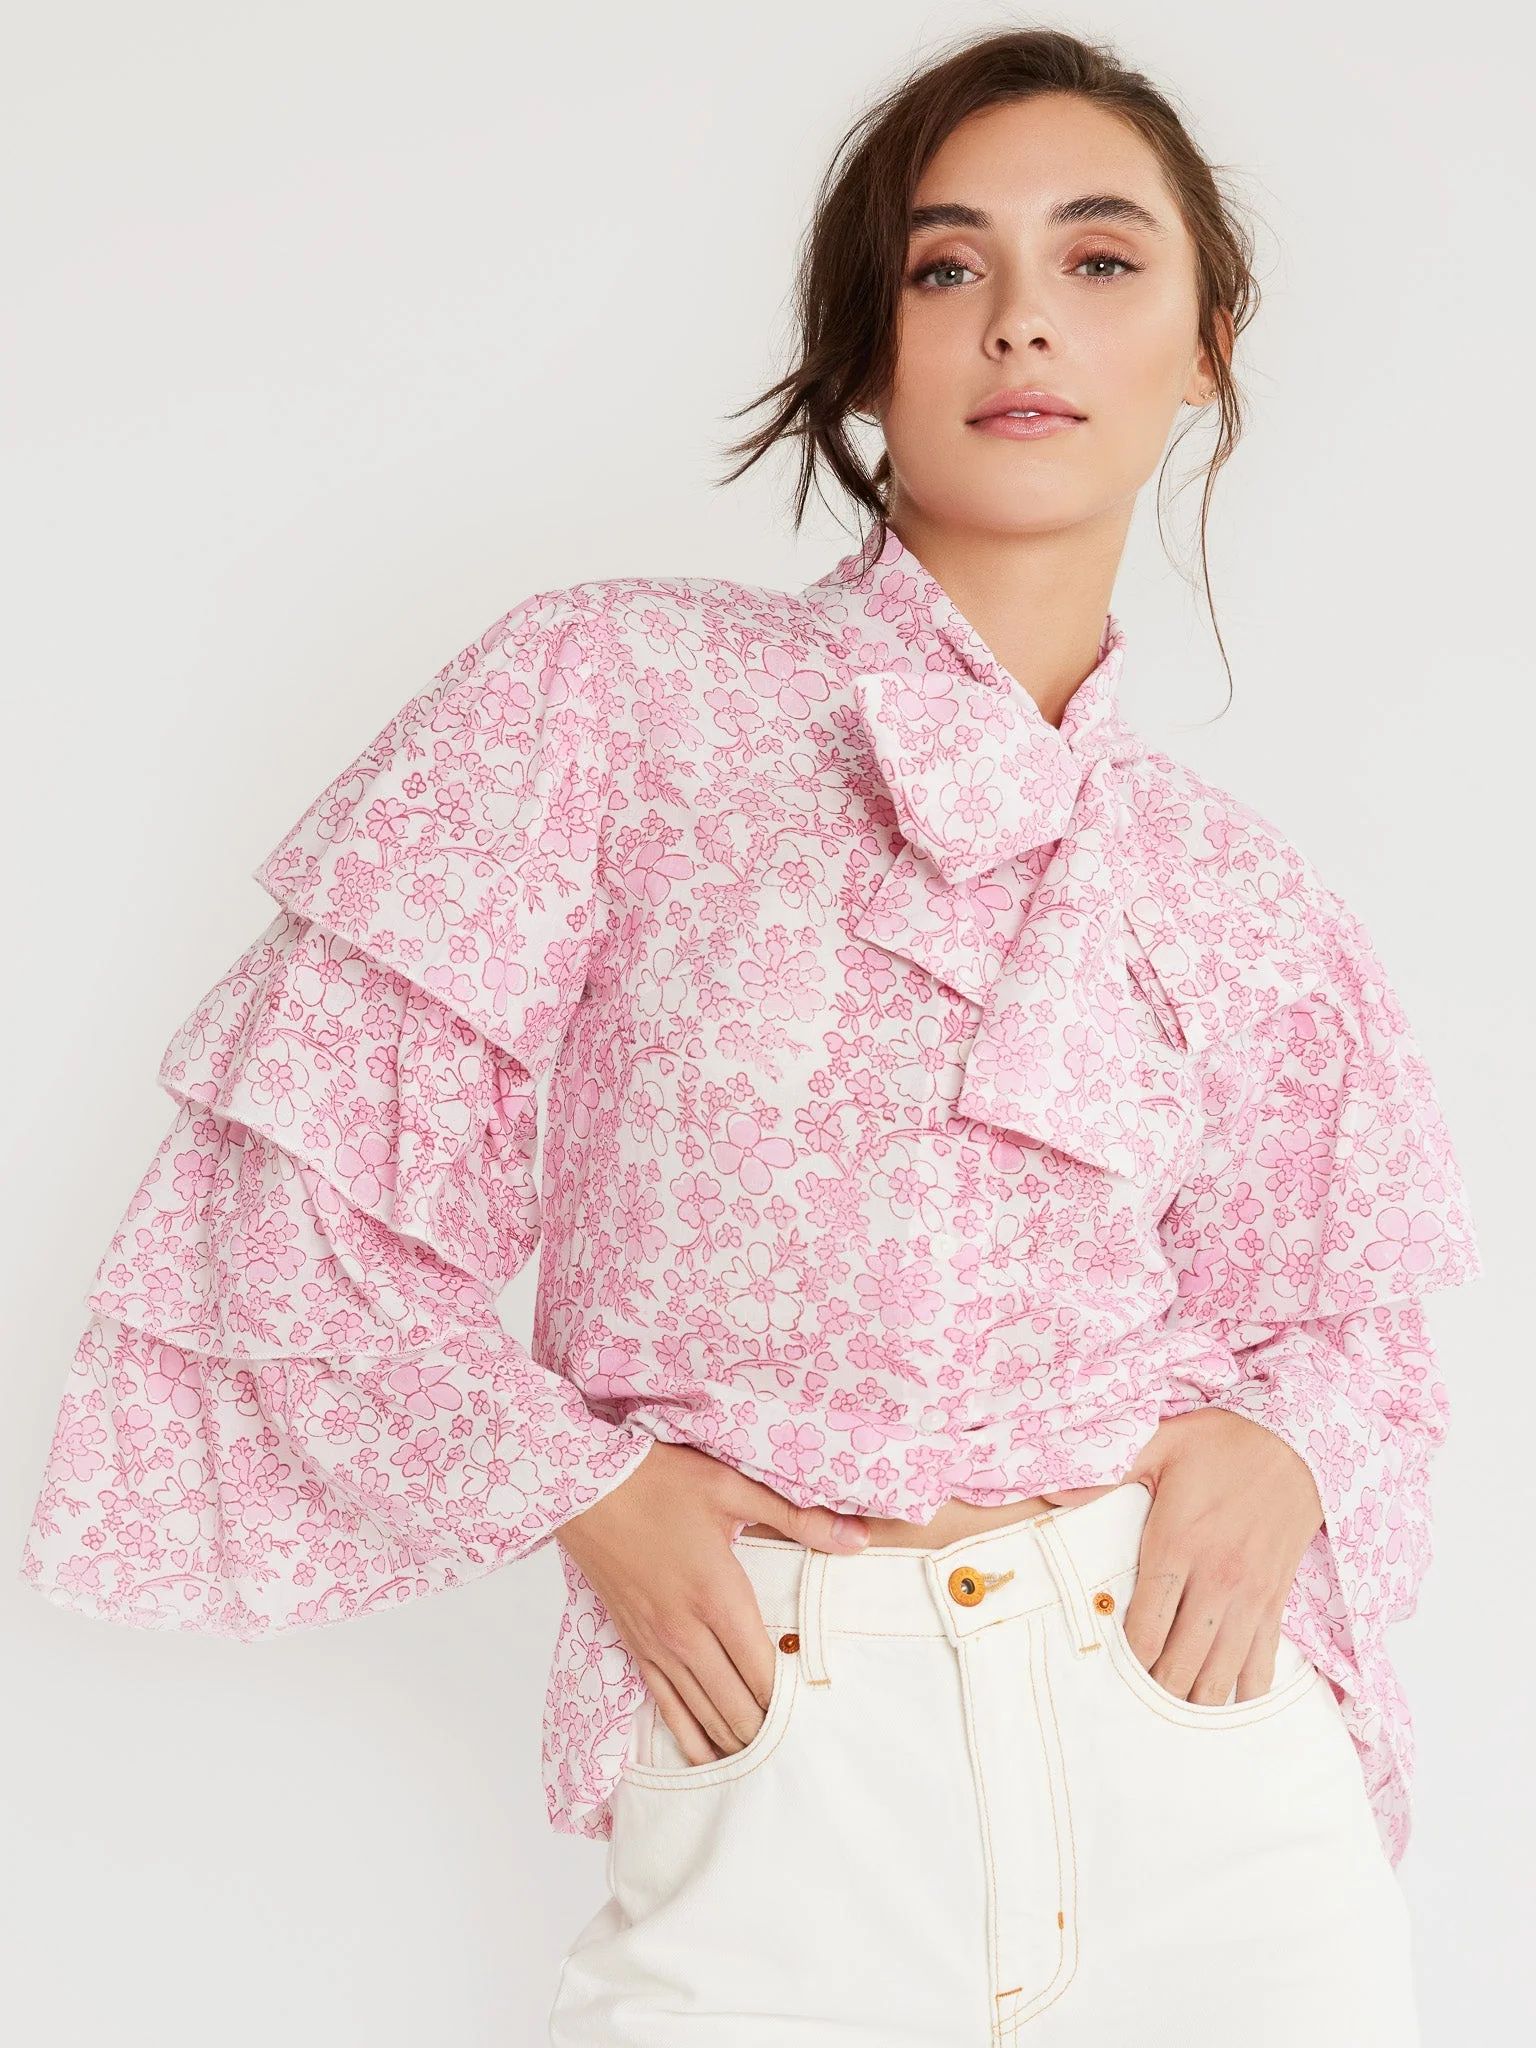 Shop Mille - Fifi Top in Jaipur Floral | Mille